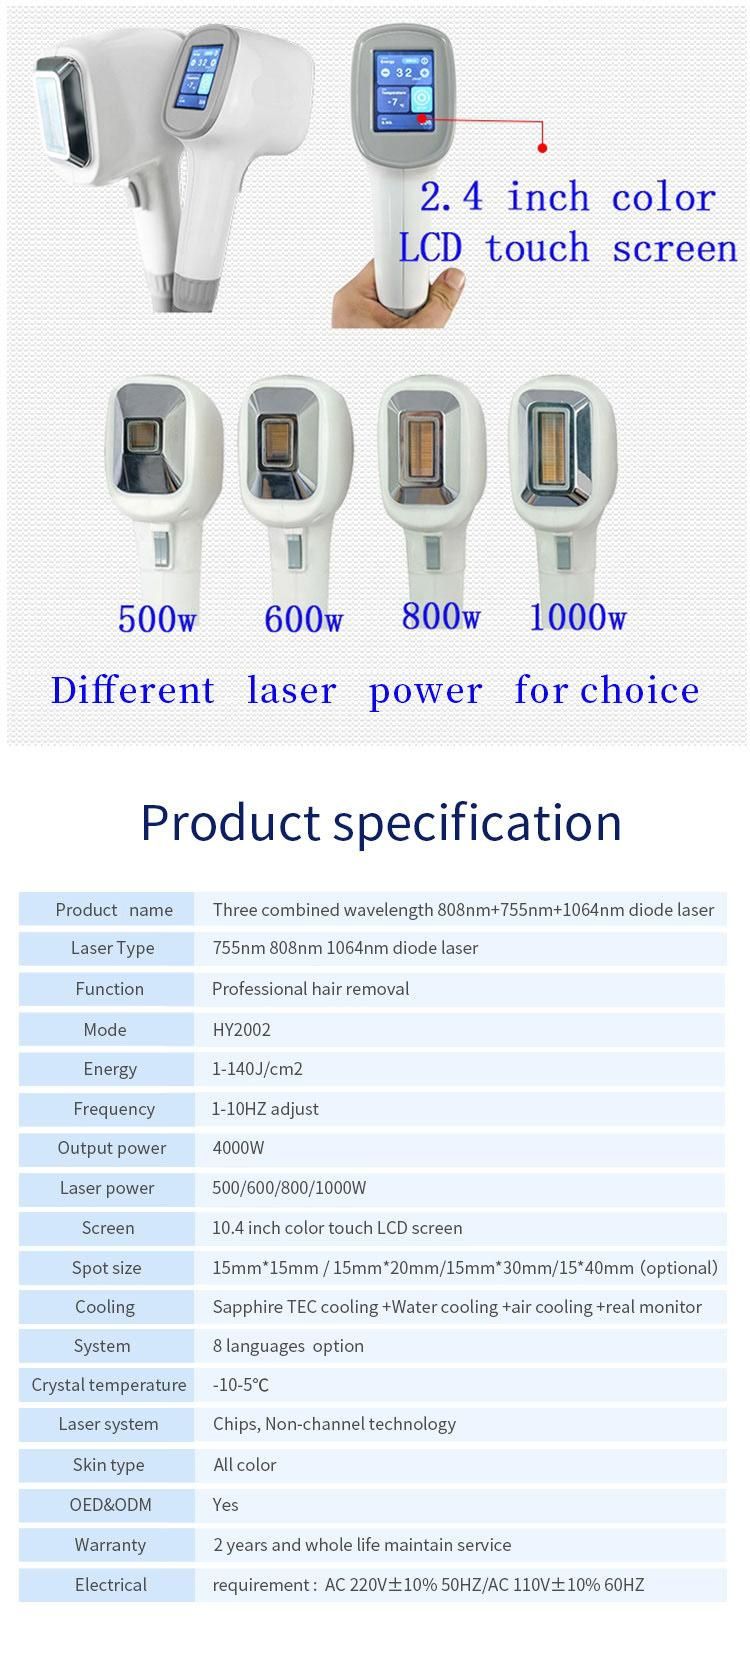 Cheap Price 808 Diode Laser Hair Removal Machine Triple Wavelength 755 808 1064 Diode Laser Hair Removal Machine